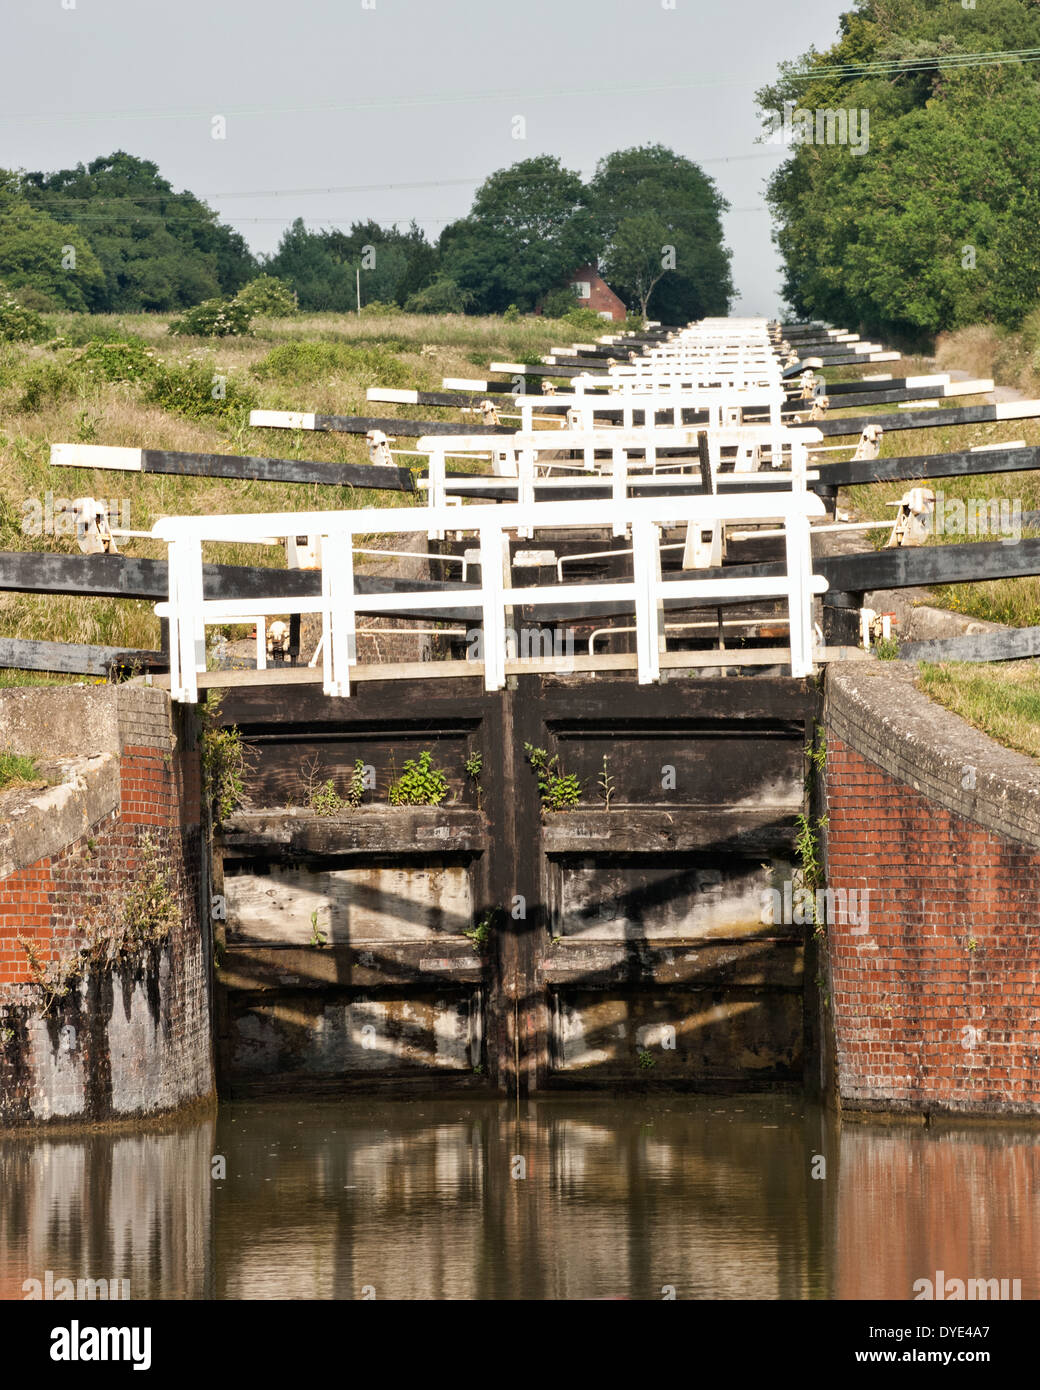 The flight of locks on the Kennet & Avon canal at Caen Hill near Devizes, Wiltshire, UK Stock Photo